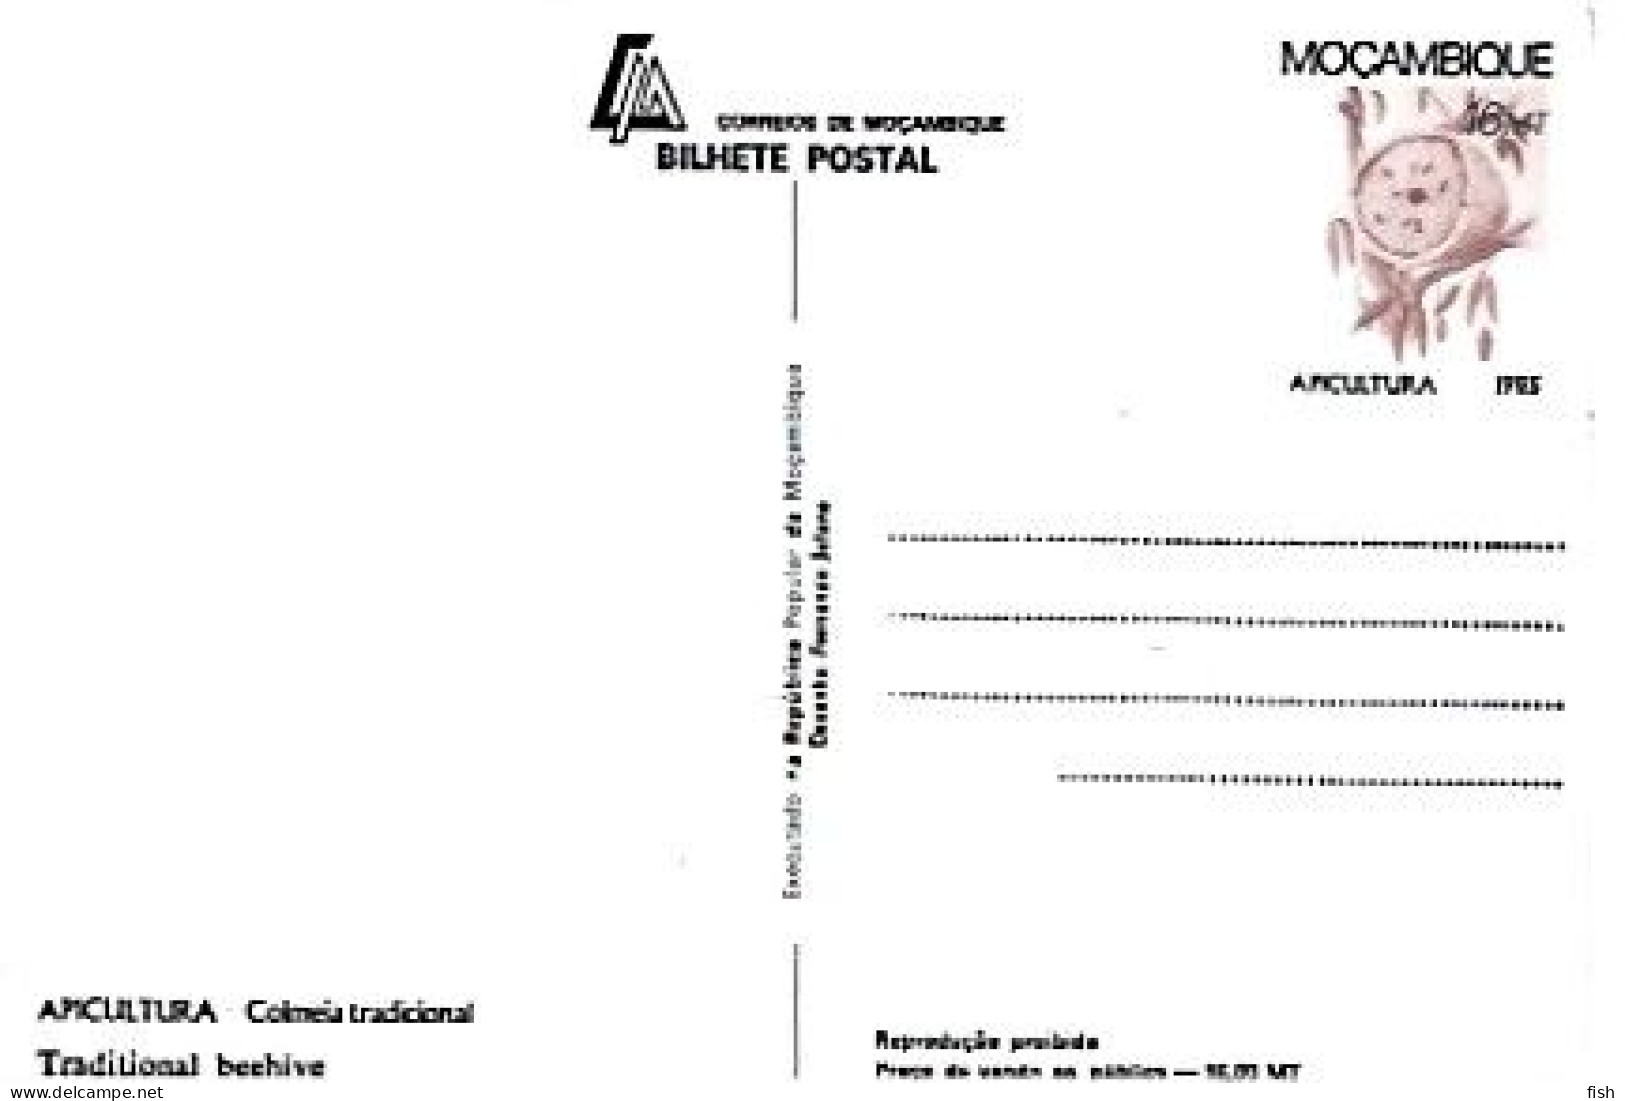 Mozambique ** & Postal Stationery, Beekeeping, Traditional Beehive 1985 (78799) - Mozambique